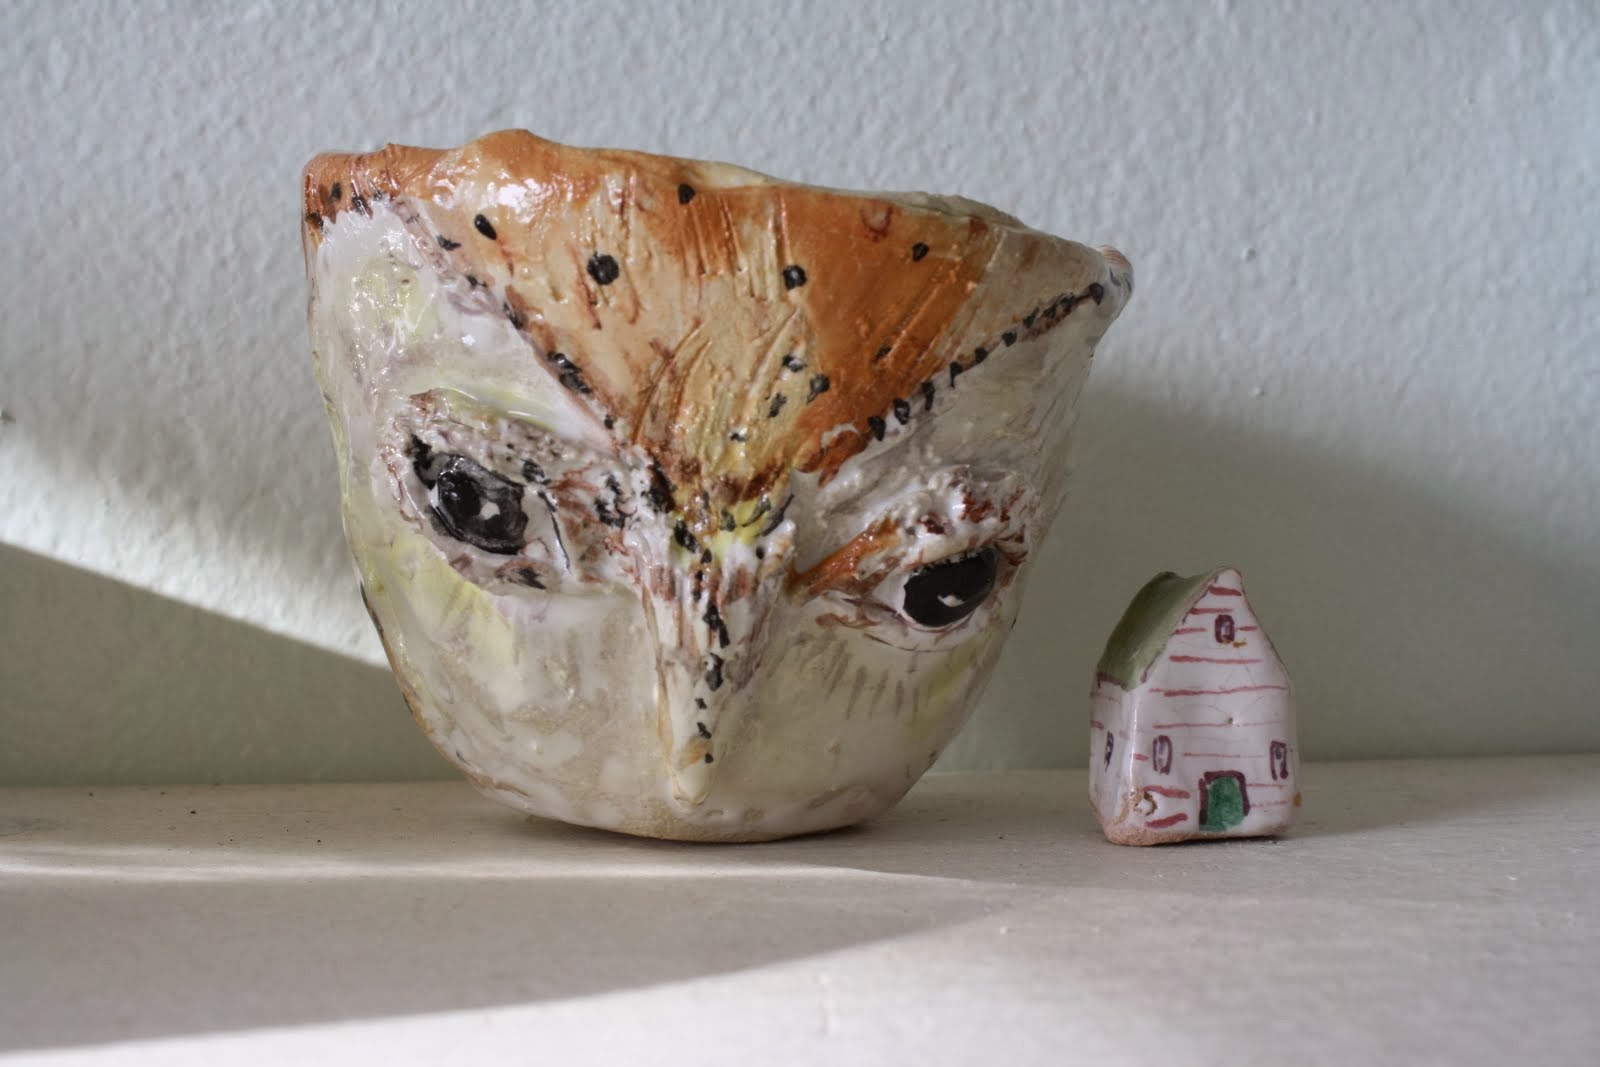 Julie Whitmore Pottery